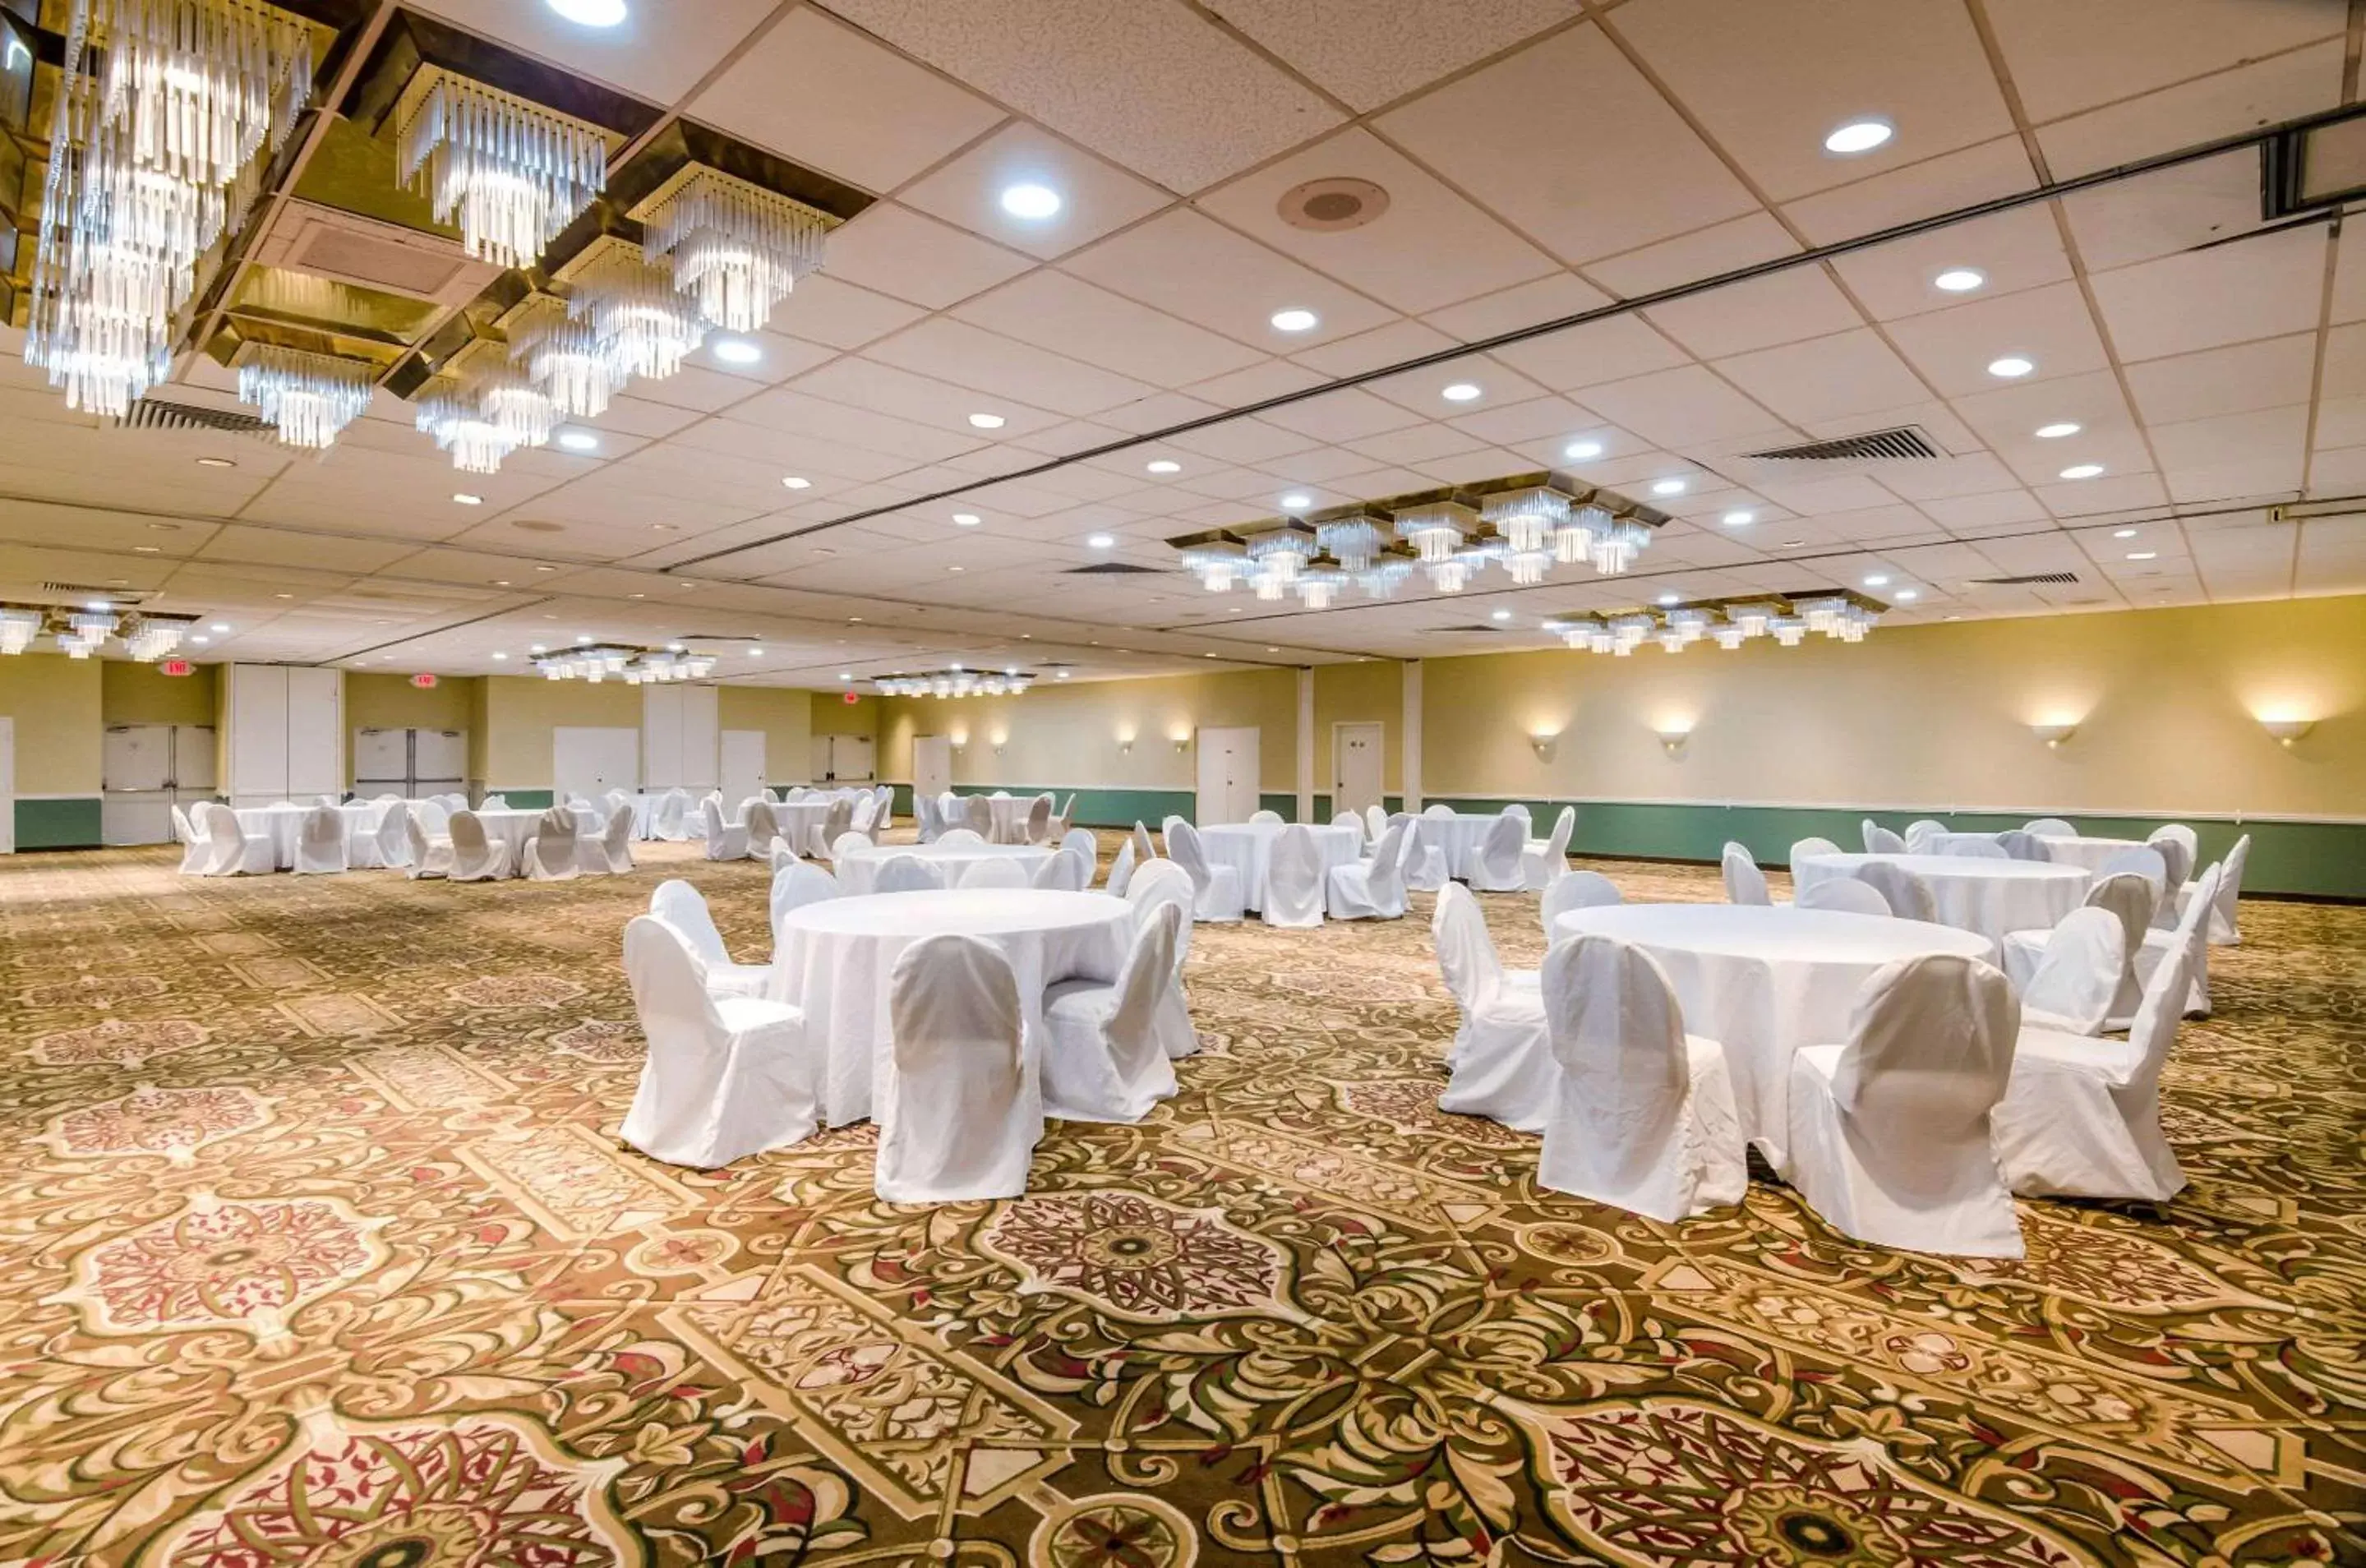 On site, Banquet Facilities in Quality Inn Roanoke Airport